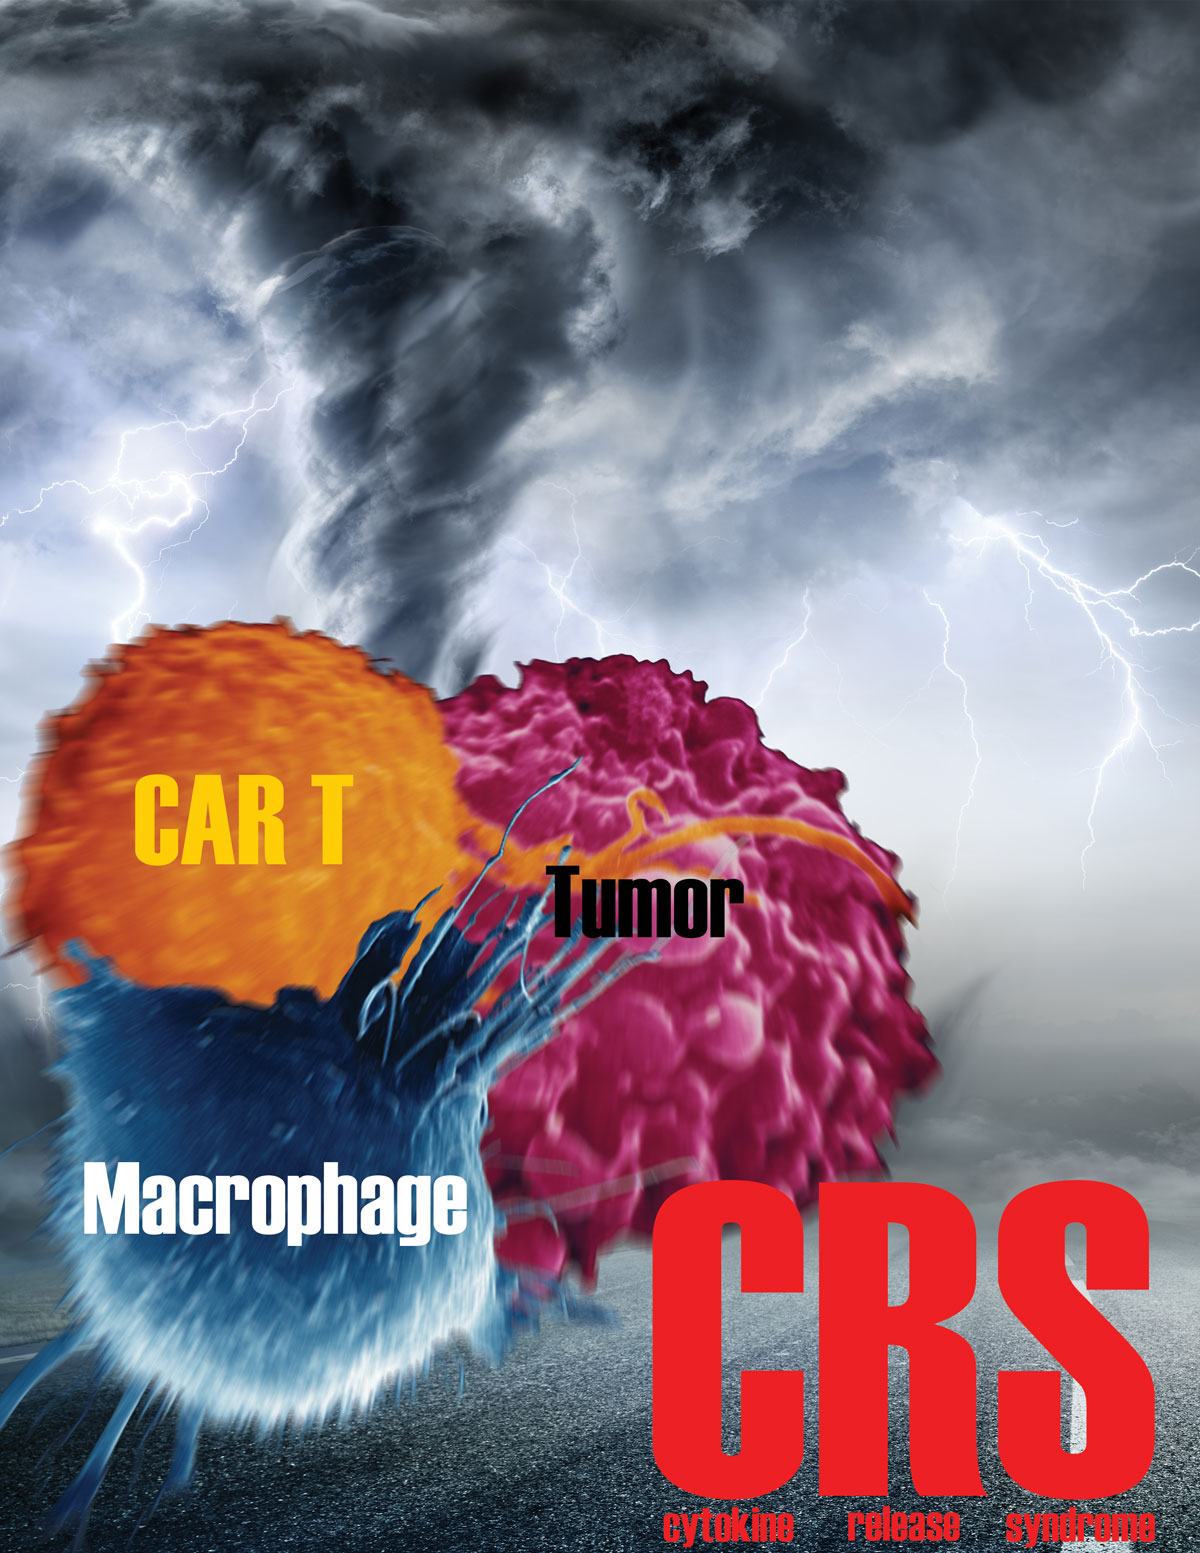 A drawing showing CAR T cells, macrophages, and tumor cells superimposed on a churning tornado-like storm. 